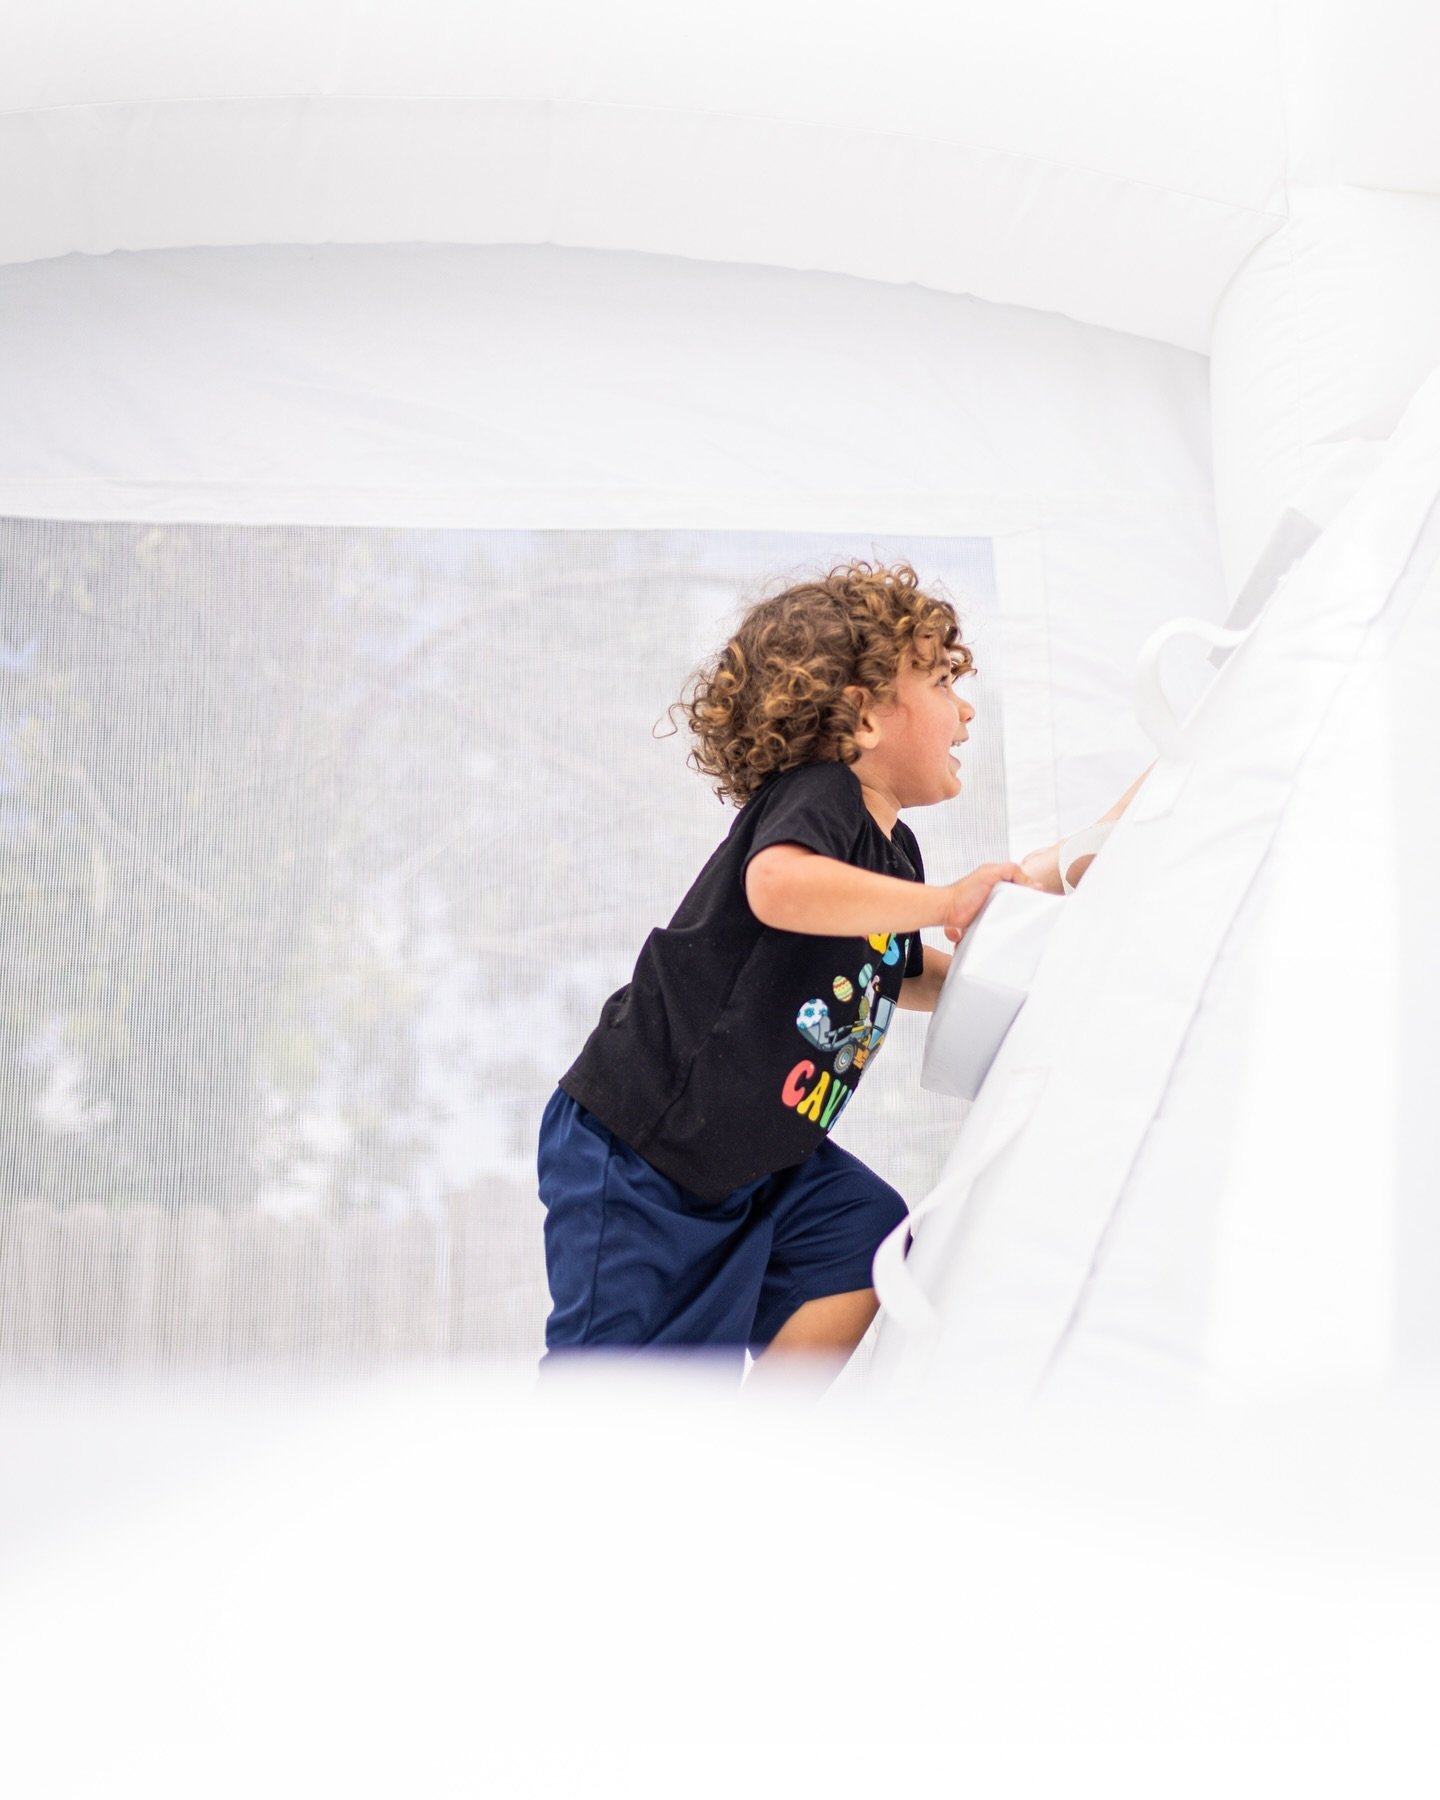 The little ones love our large bounce house with a slide. Endless entertainment for your next Backyard Bash 🥳 click our link in the bio to book! Our summer is filling up fast.